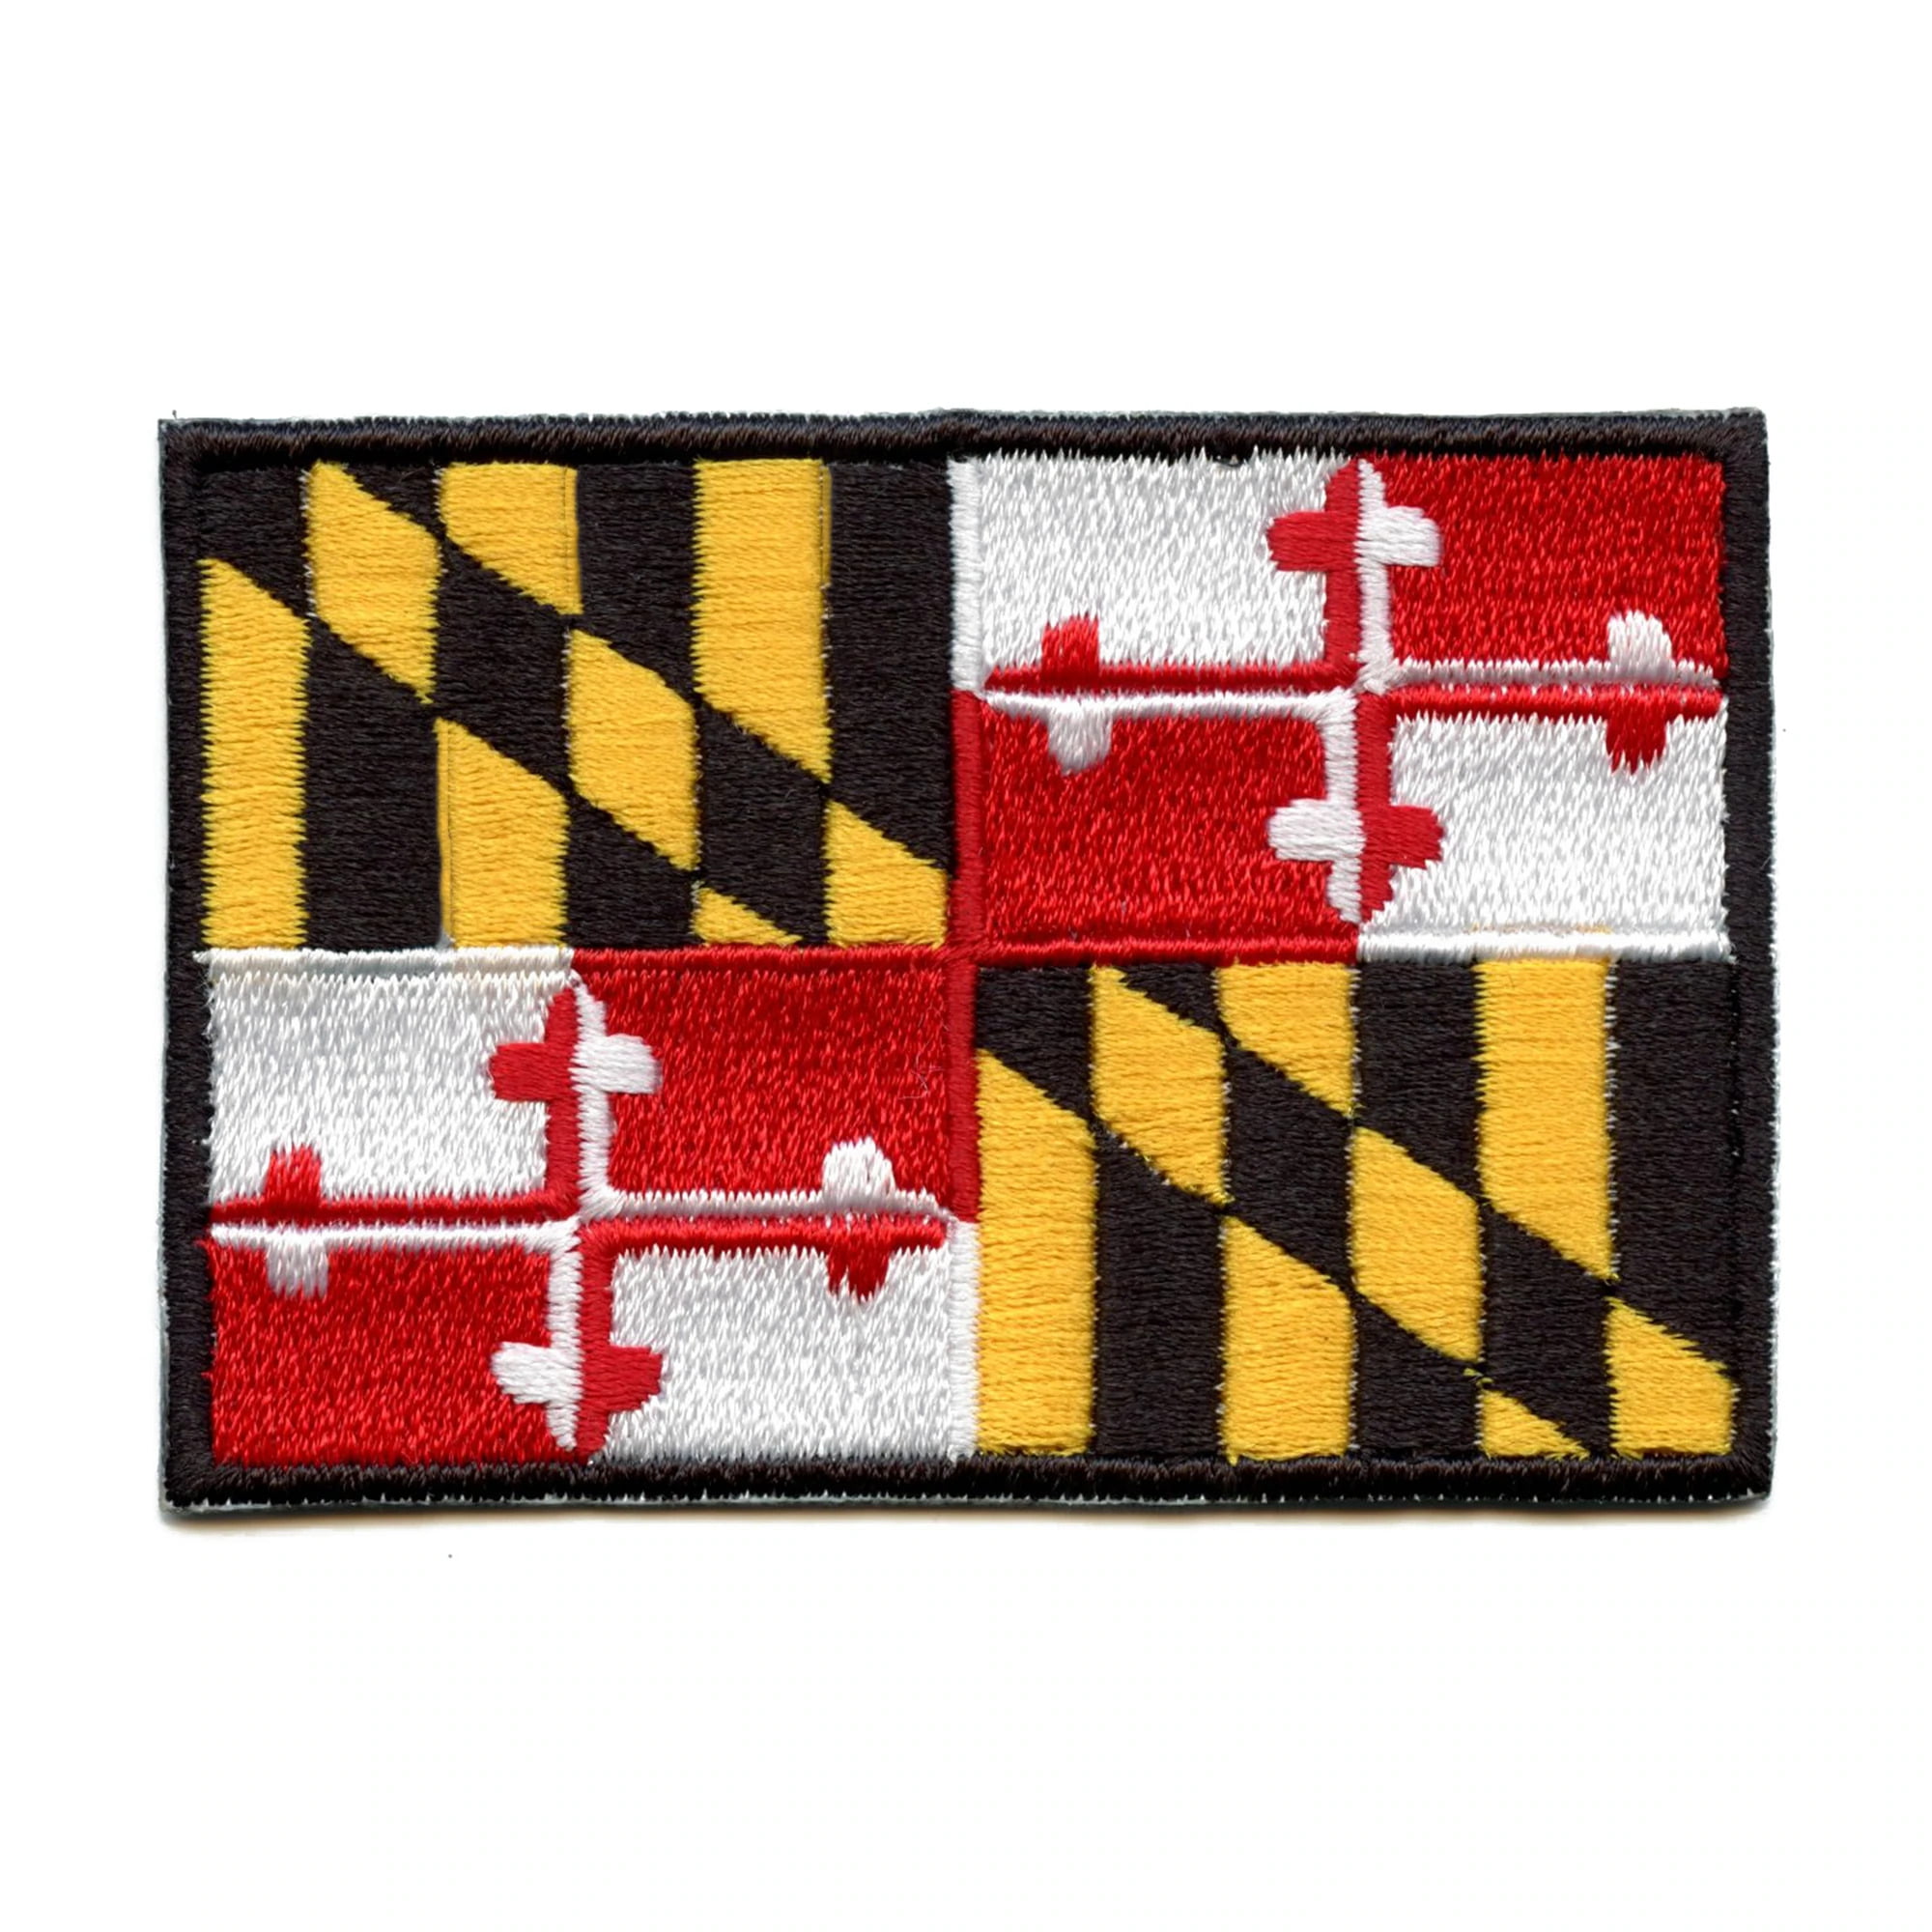 2x3 Patch Maryland State Flag